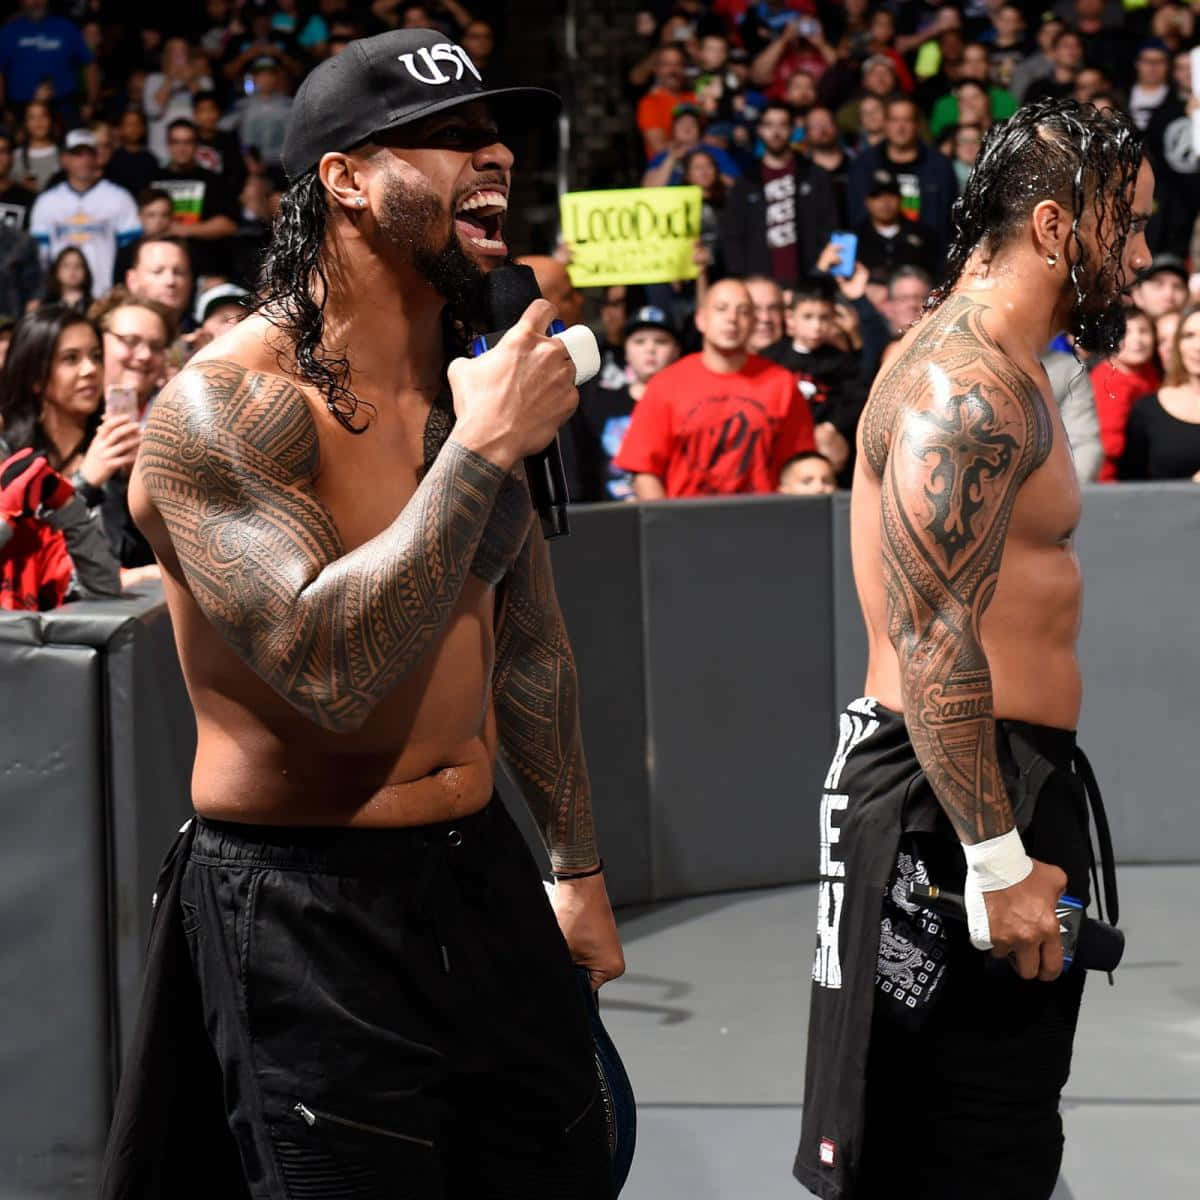 Jey Uso alongside his twin brother Jimmy Uso showcasing their brotherly bond in the ring. Wallpaper